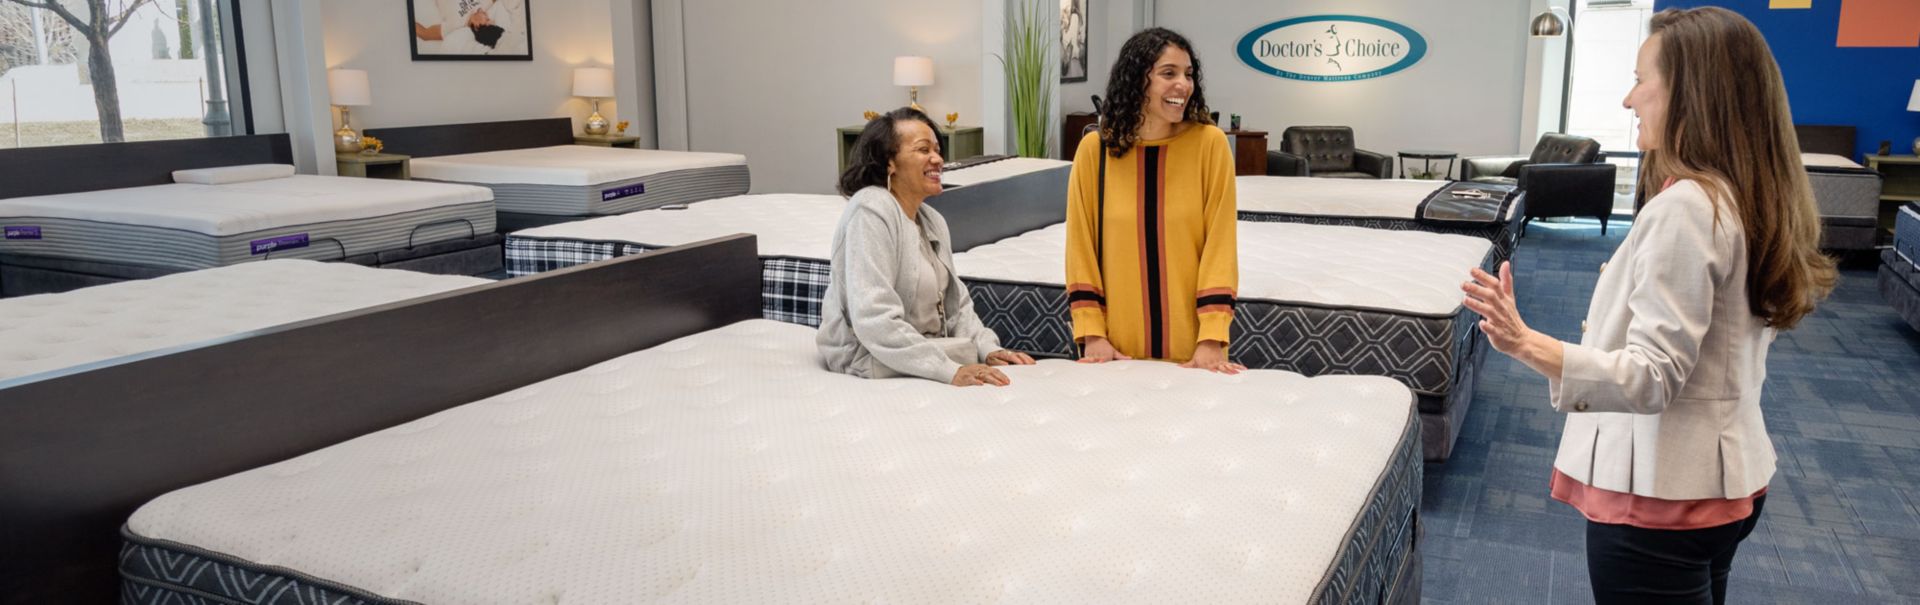 Doctors Choice Hybrid Mattress with Models